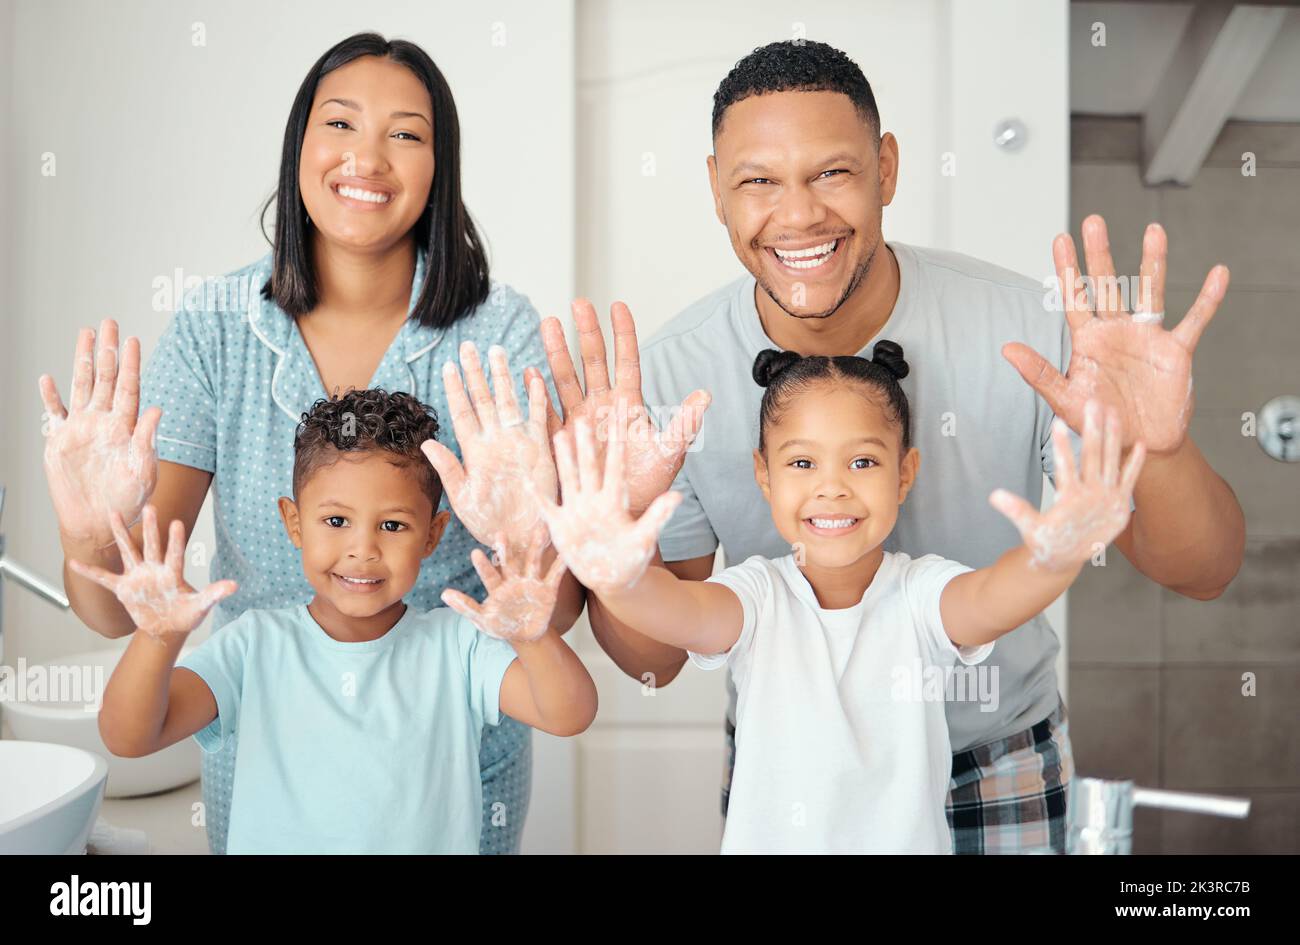 Parents, children and cleaning hands as a happy family in a bathroom together at home with a proud mother and father. Smile, dad and healthy mom Stock Photo